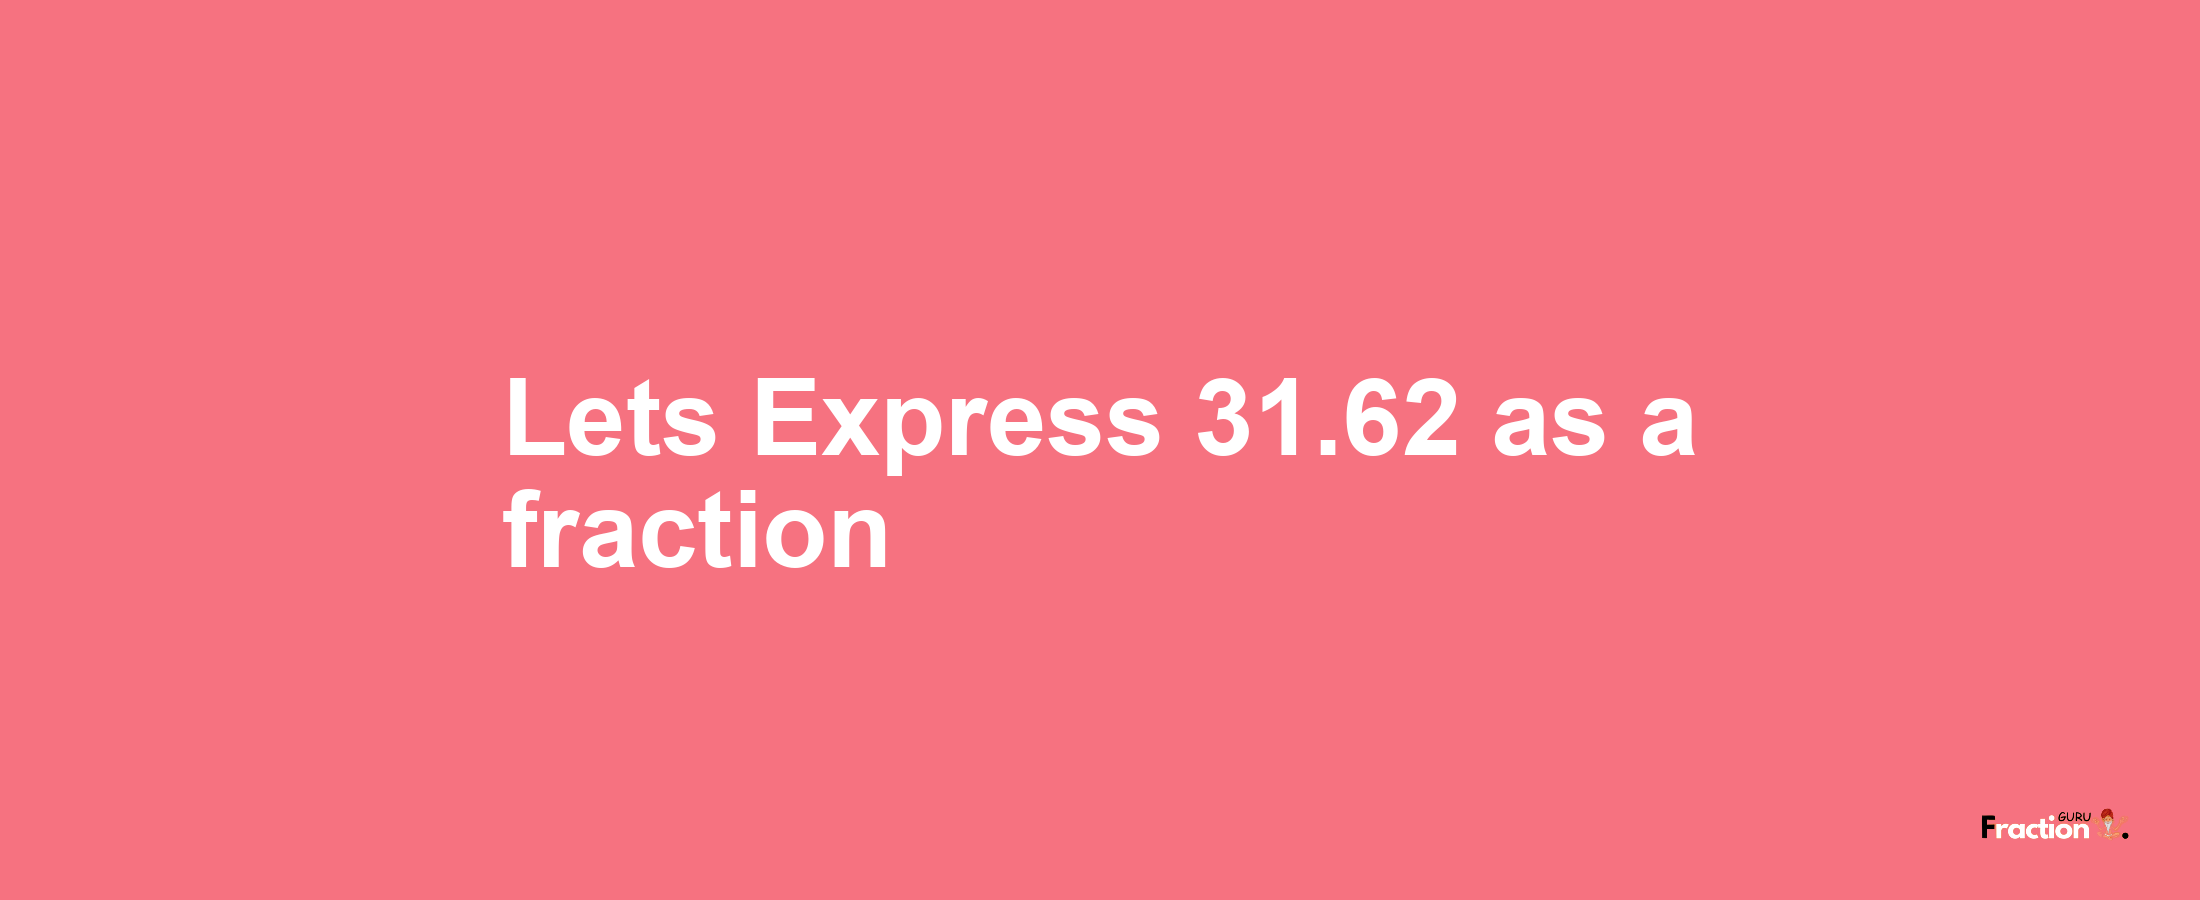 Lets Express 31.62 as afraction